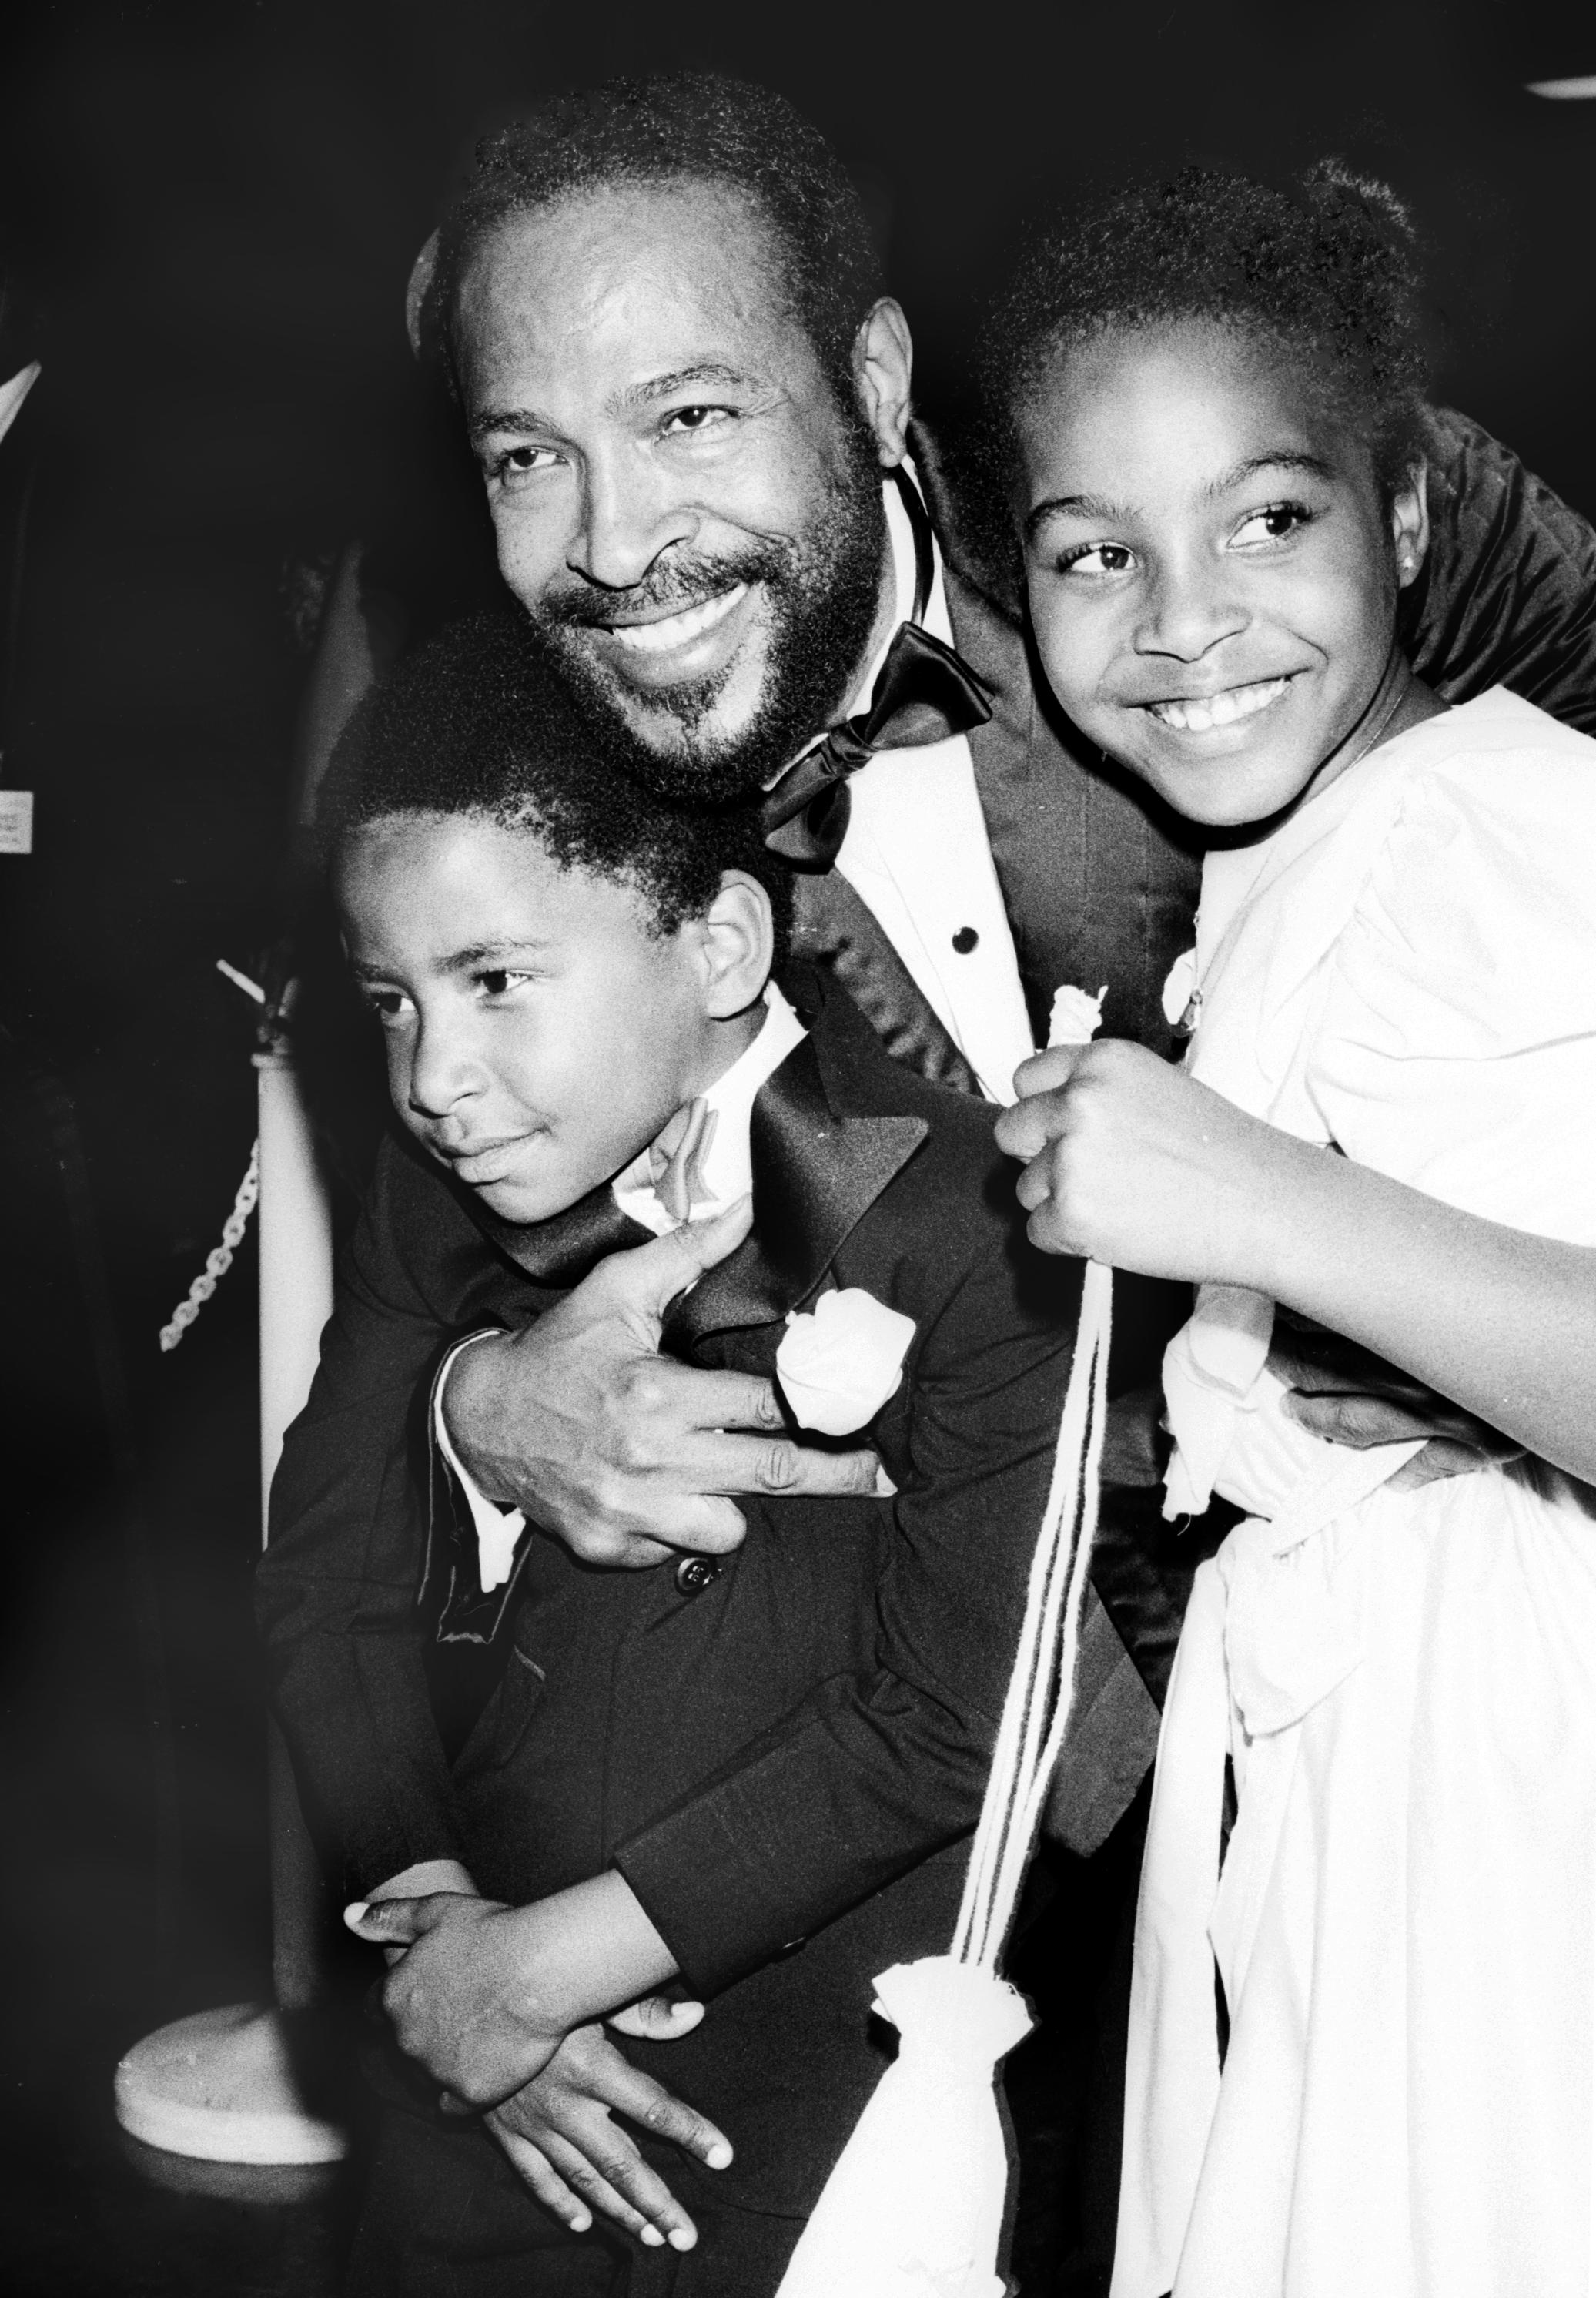 Soul singer Marvin Gaye hugs his children, Nona Gaye and Frankie Chirstian Gaye at an event in circa 1981. | Source: Getty Images